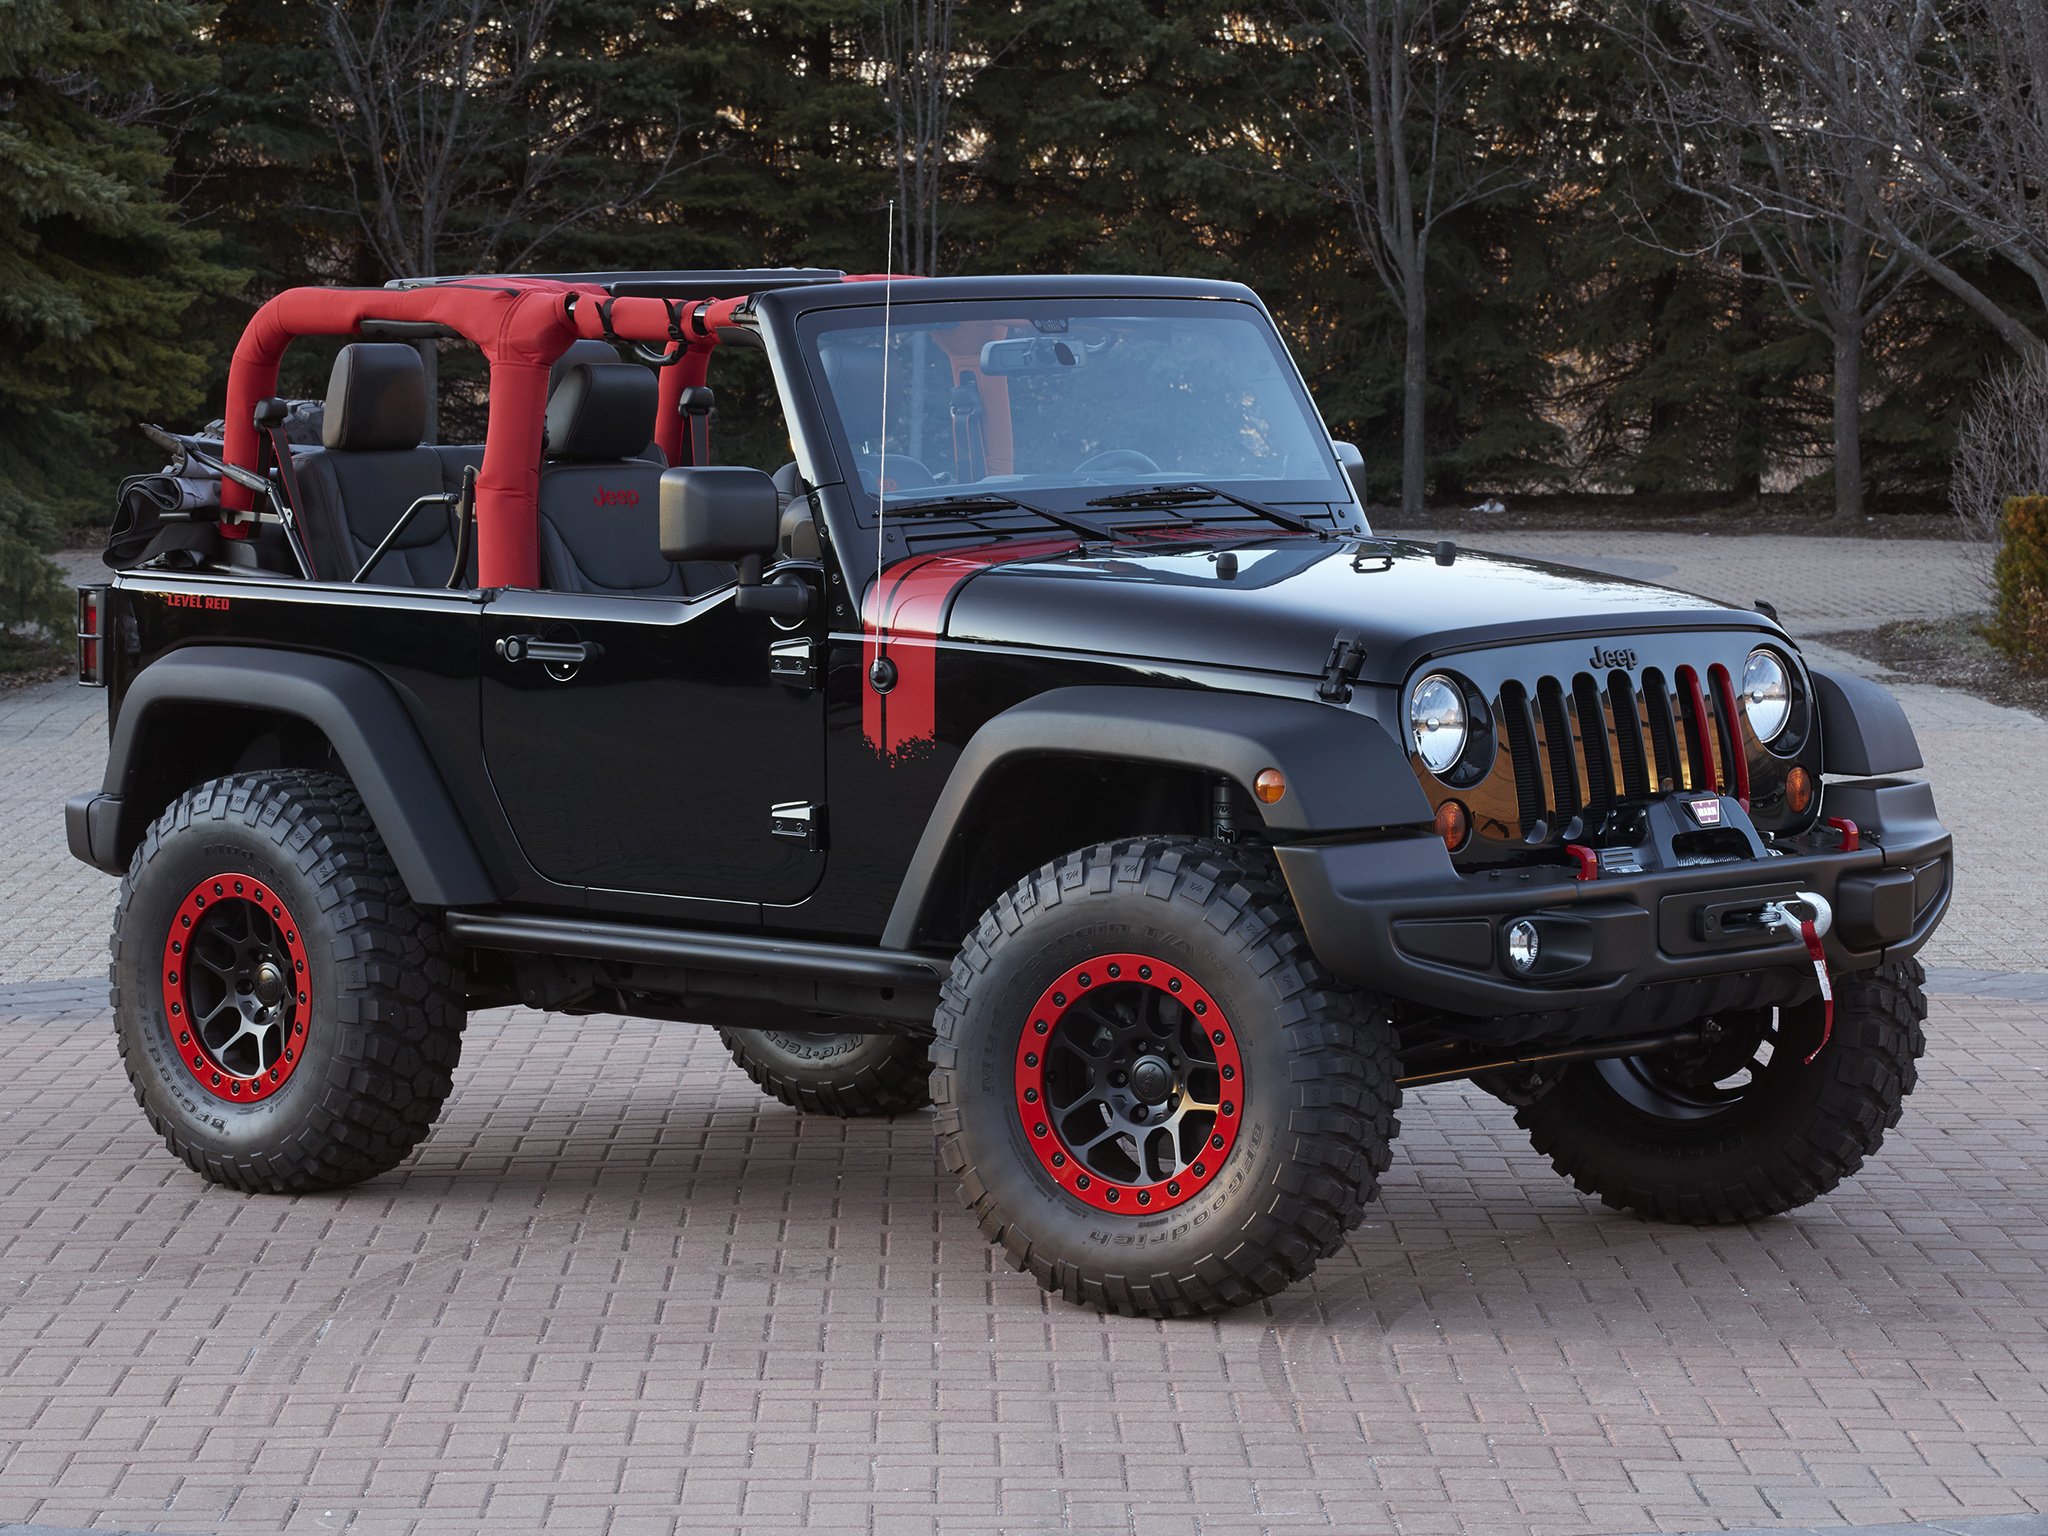 2014, Jeep, Wrangler, Level, Red, Concept,  j k , 4x4, Suv, Tuning Wallpaper